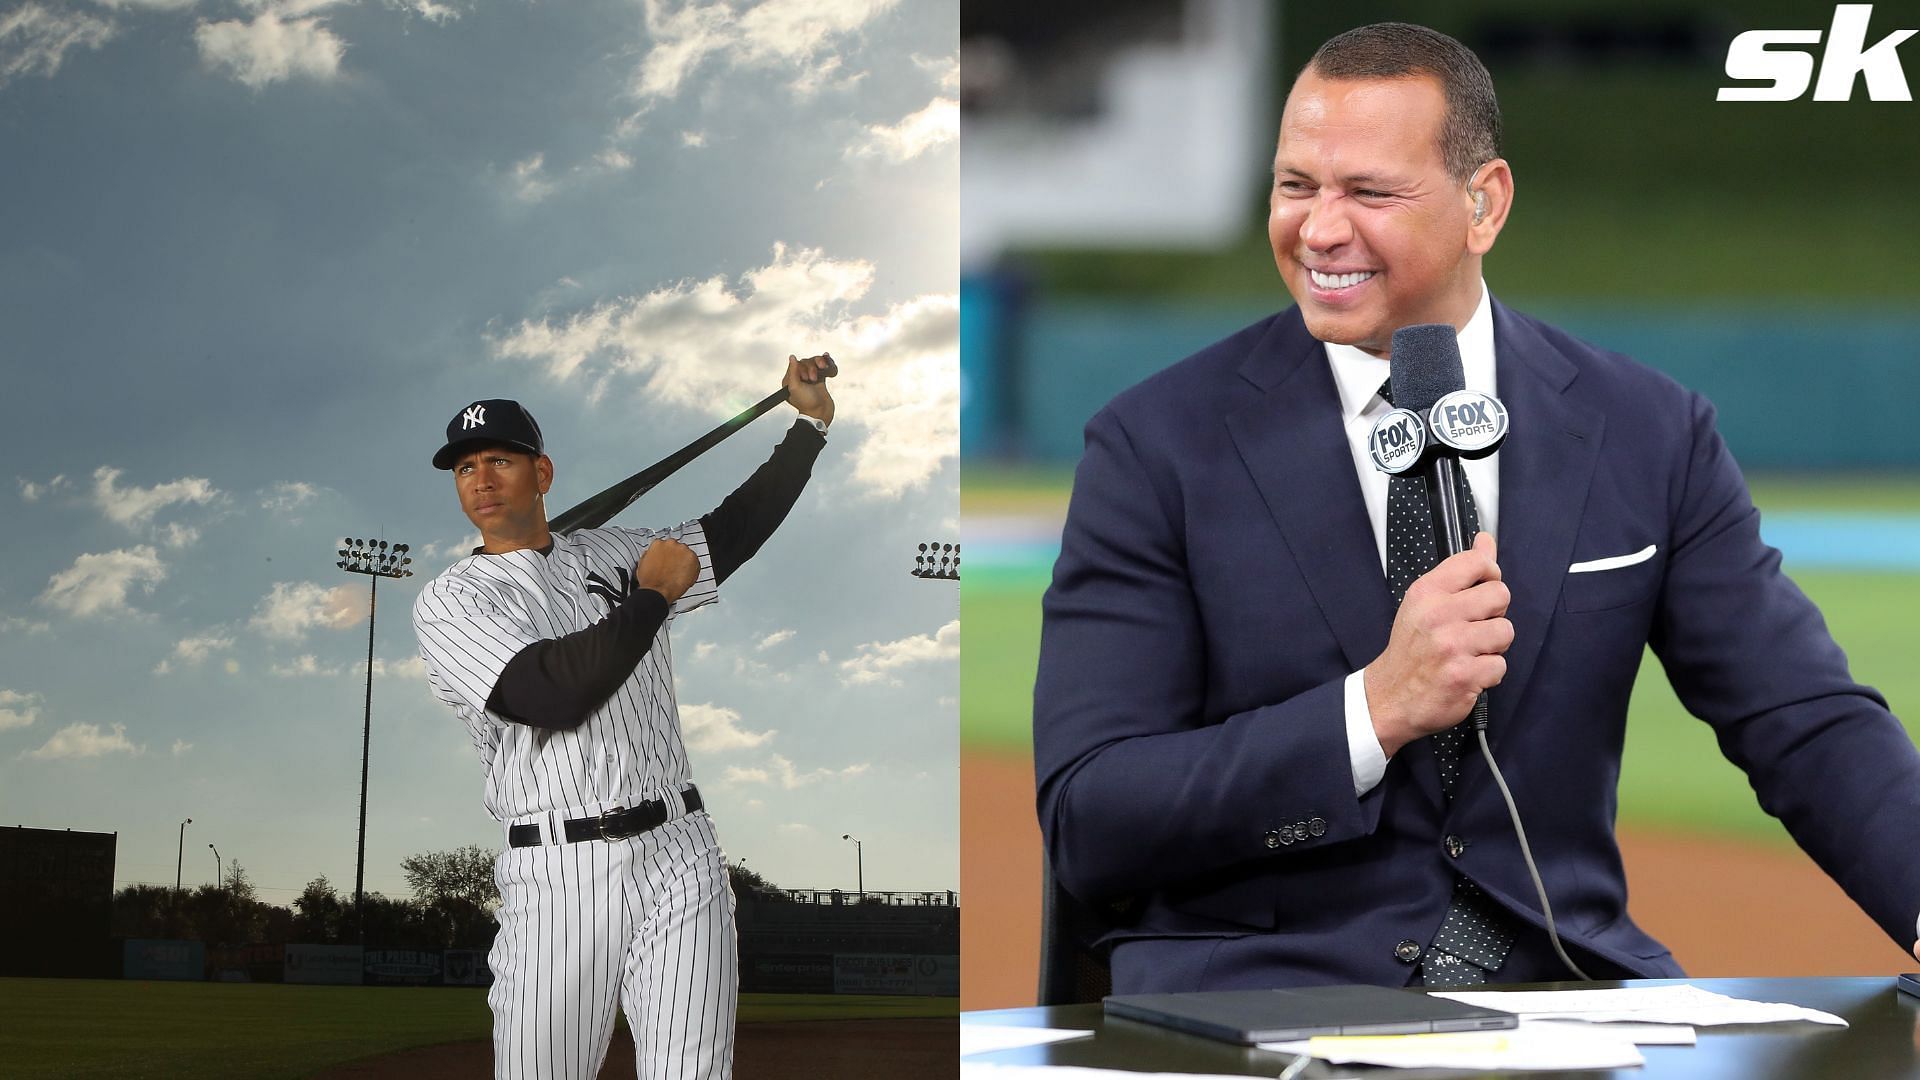 David Ortiz gives Alex Rodriguez a champagne shower while wearing